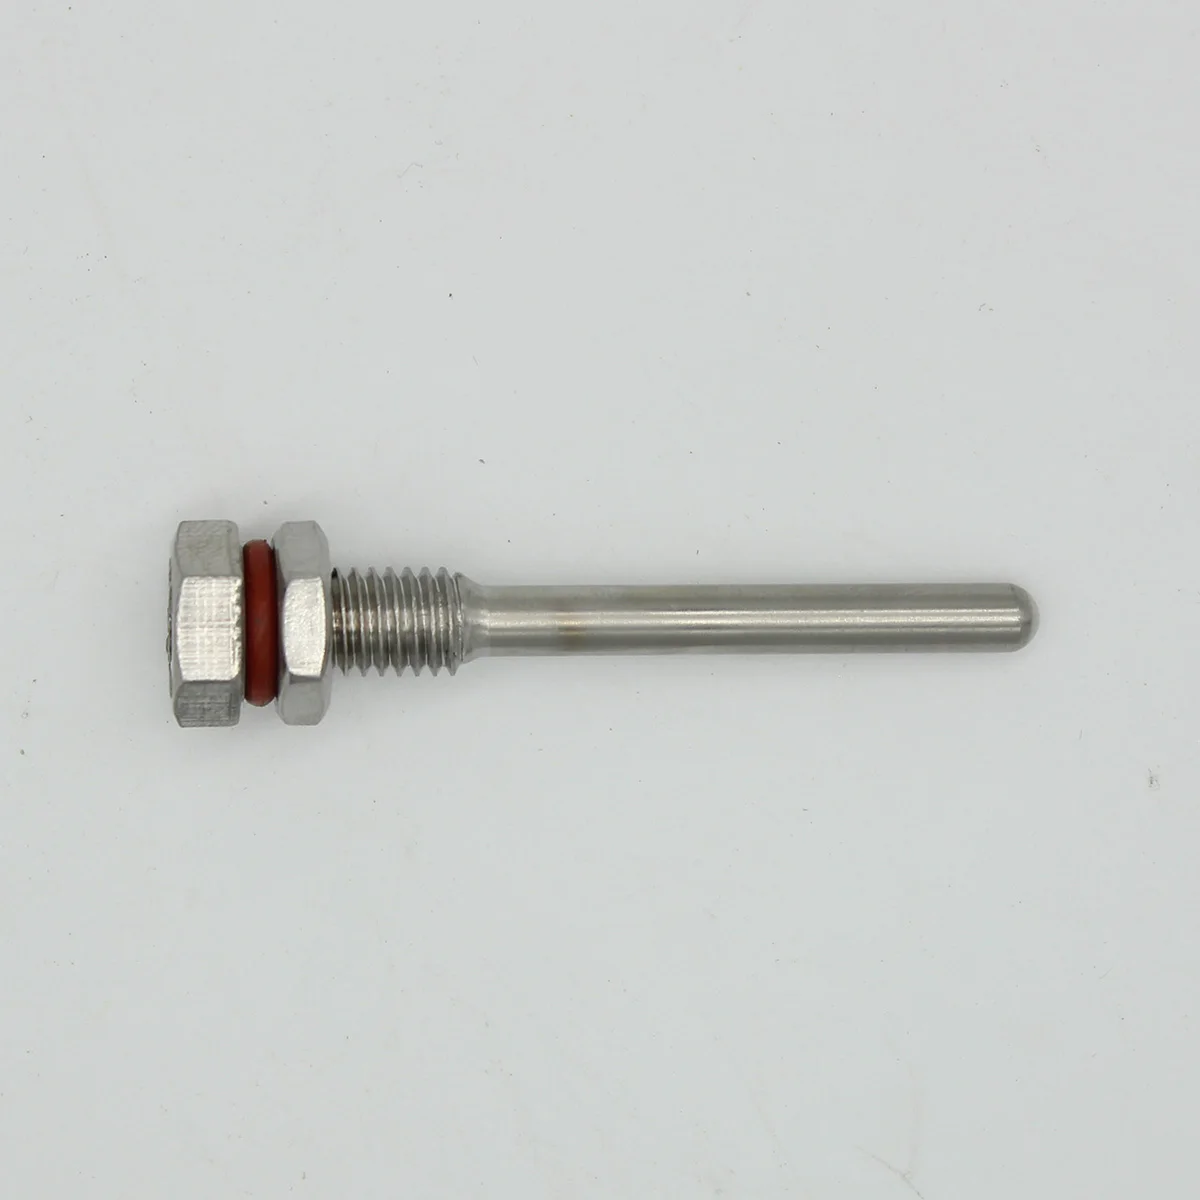 Rvs Thermowell M8X1.25 Threads voor Temperatuursensoren Thermowells Voor Temperatuur Instrumenten Thermometer